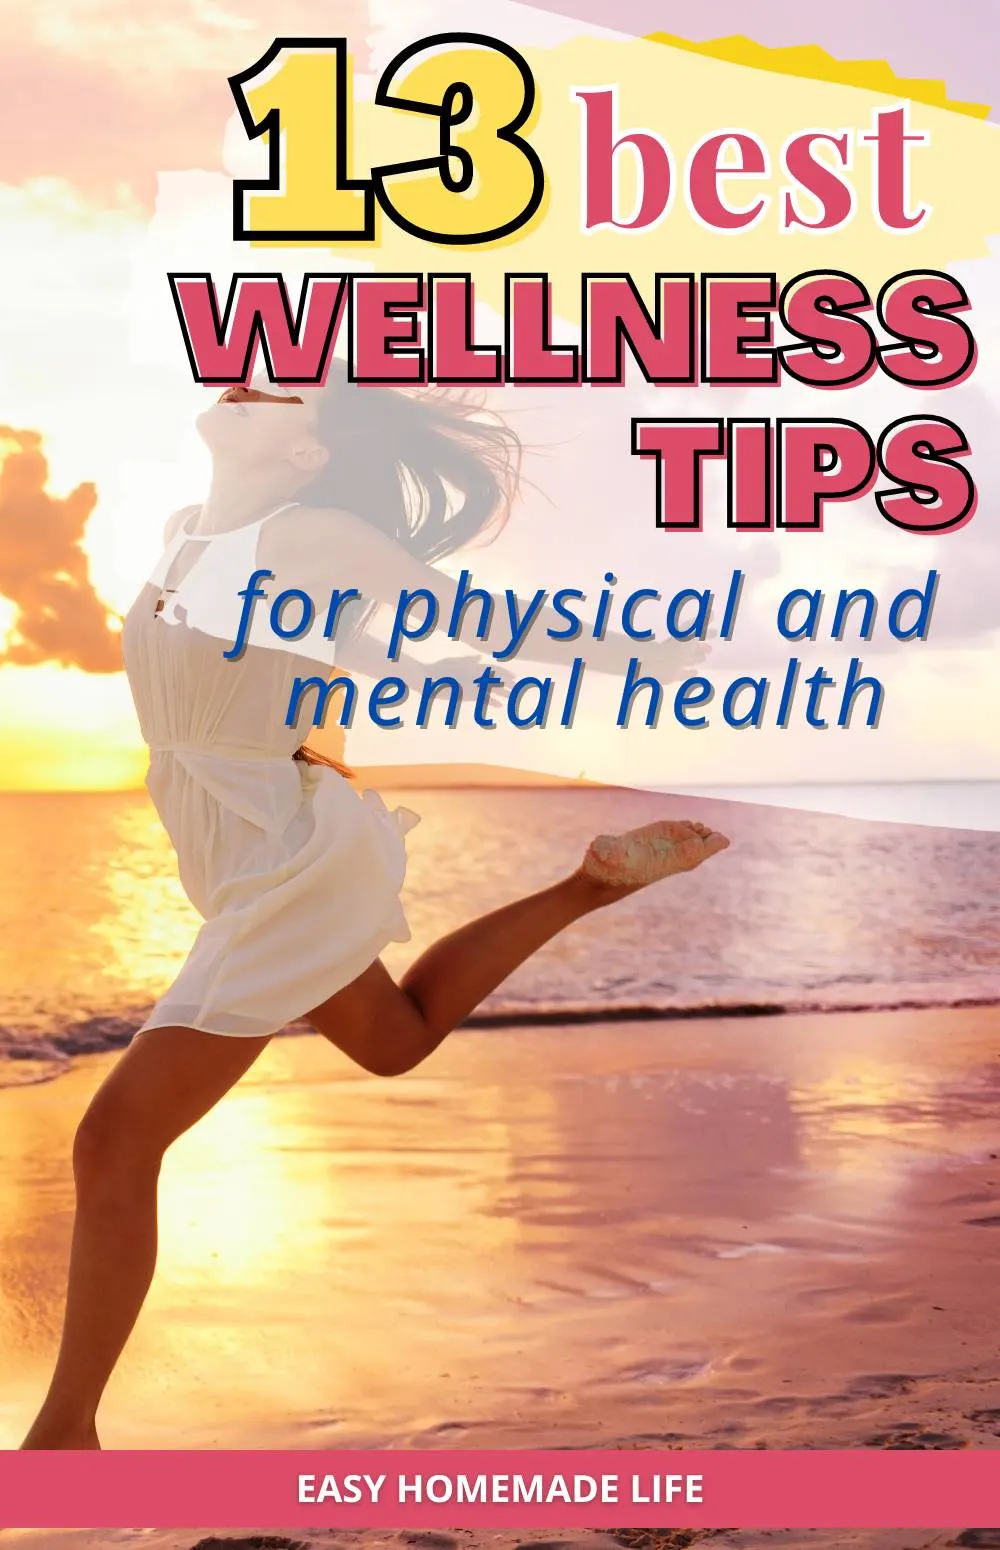 13 best wellness tips for physical and mental health.